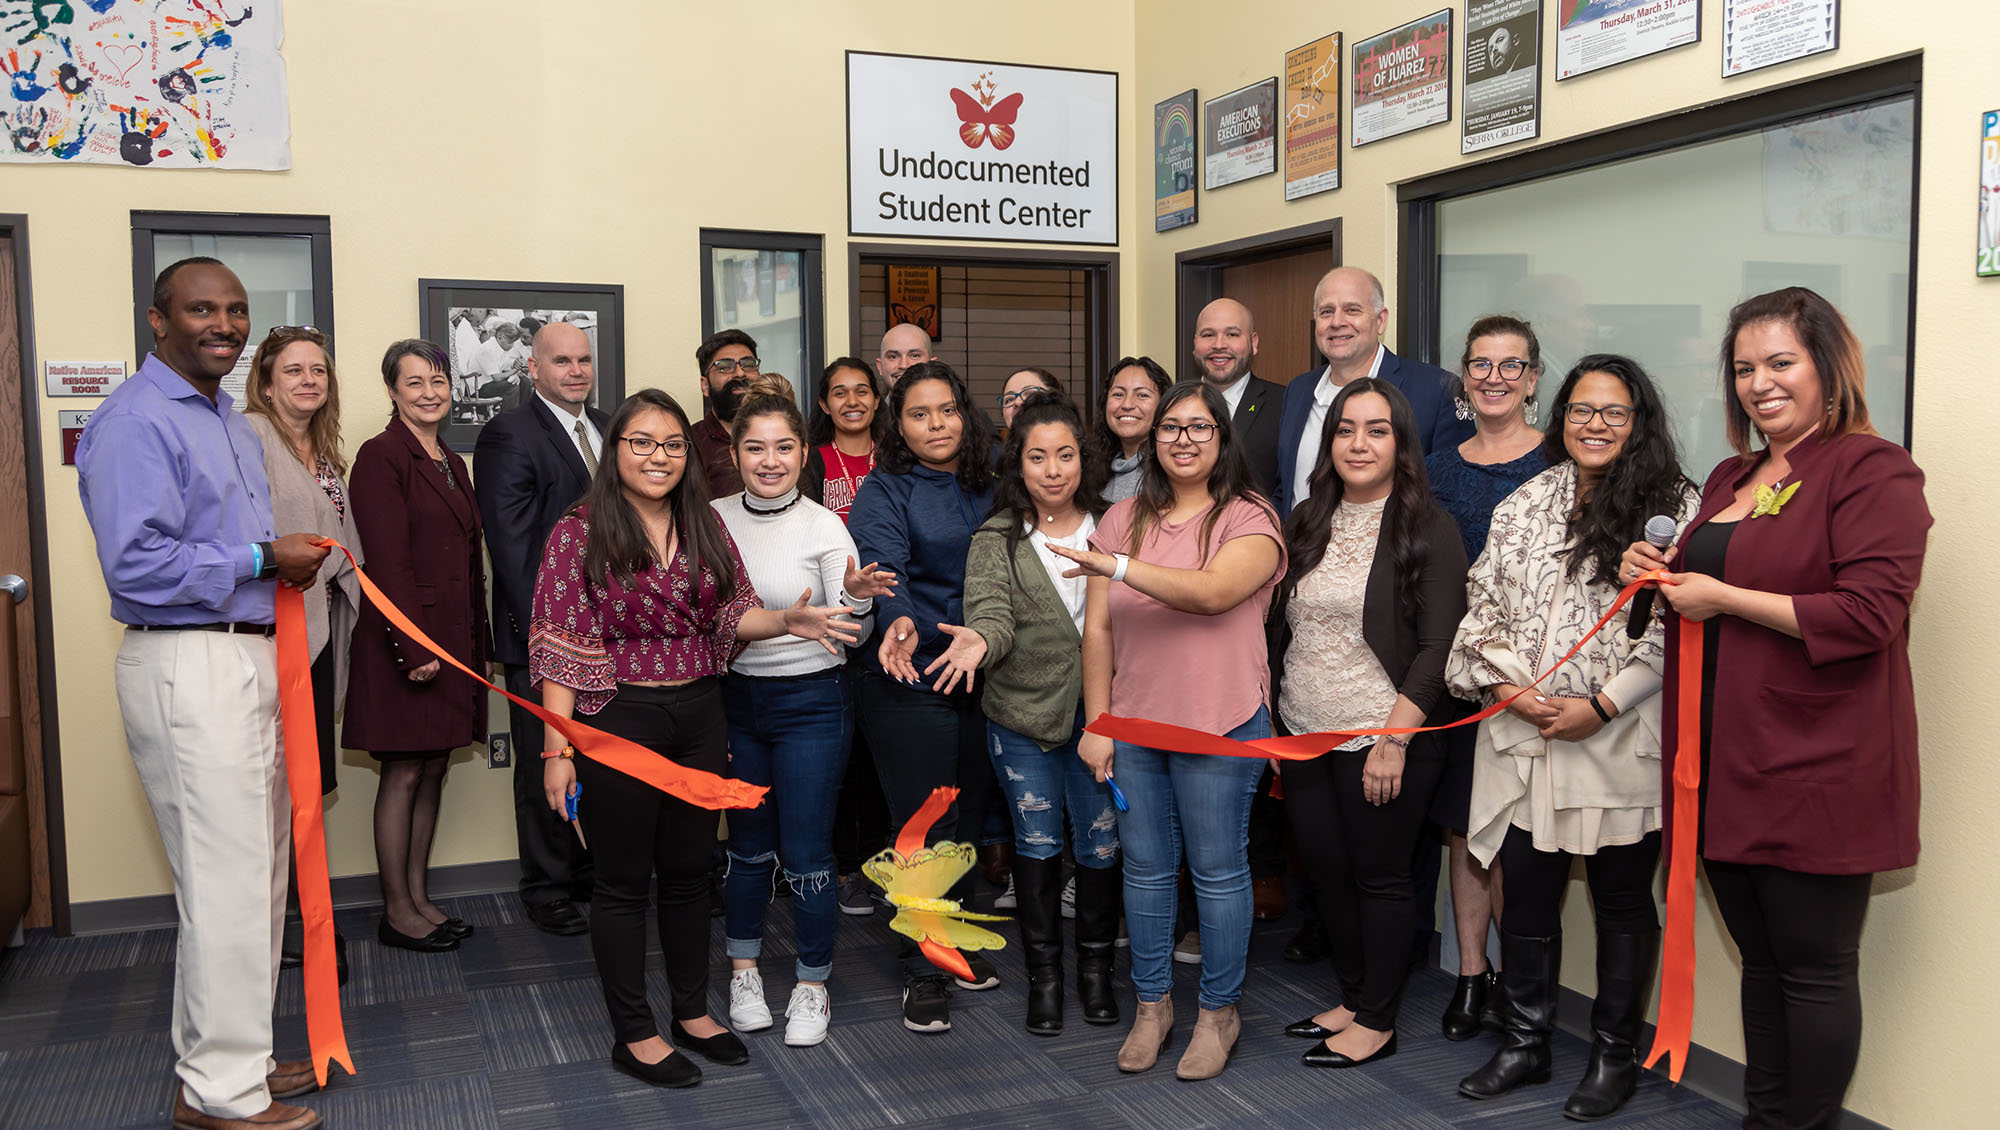 Ribbon cutting ceremony at the opening of the Undocumented Student Center at Sierra College